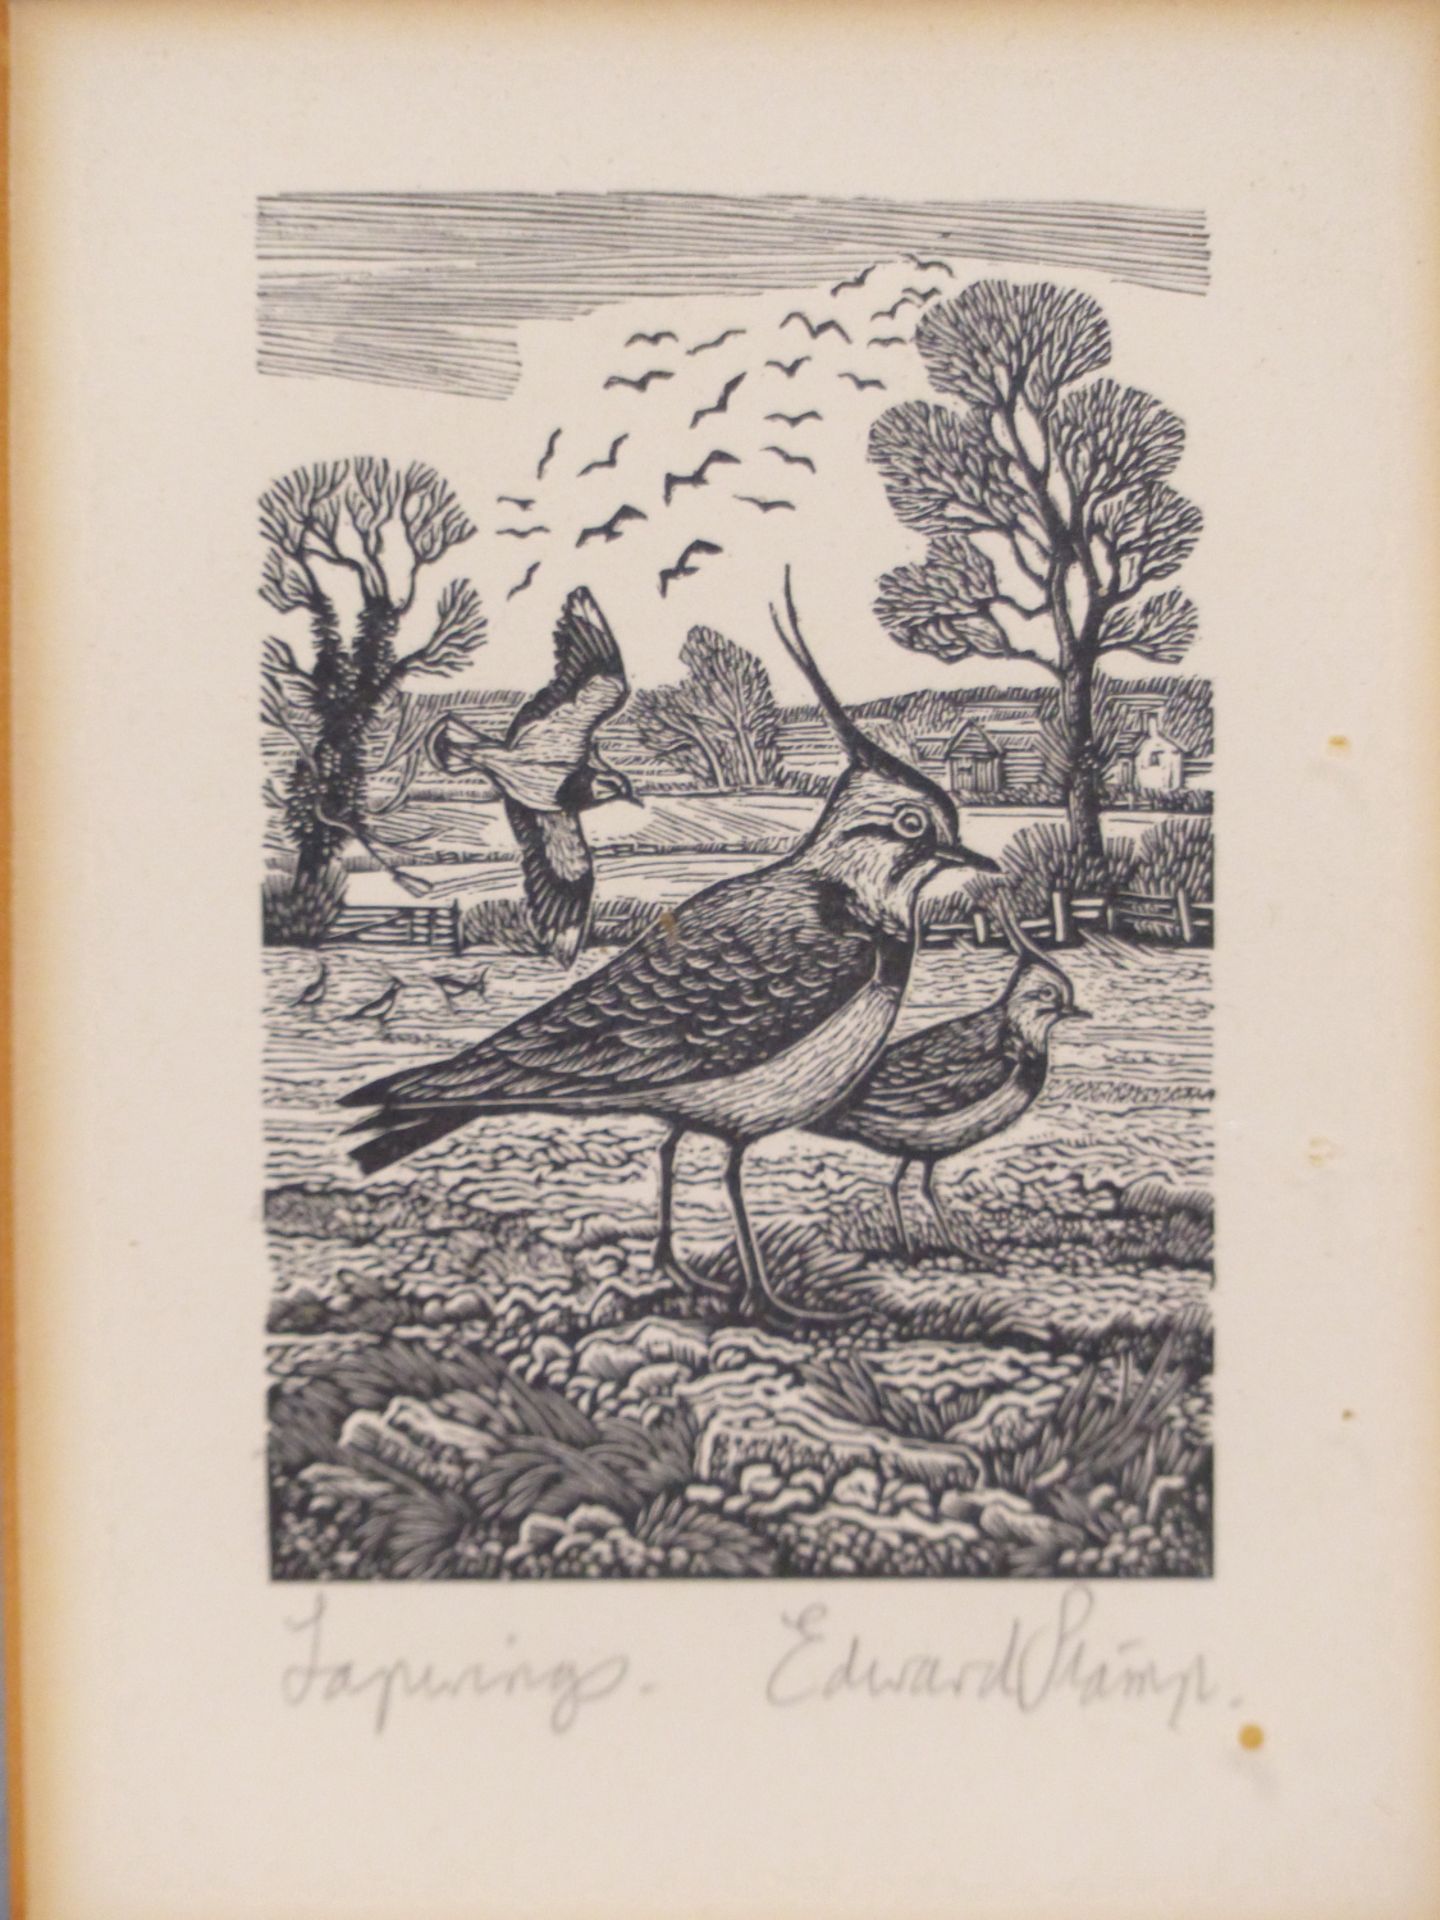 EDWARD STAMP ( 20TH C) ARR. LAPWINGS, WOODCUT PRINT. PENCIL SIGNED AND TITLED. 5.2 X 7.8 cm